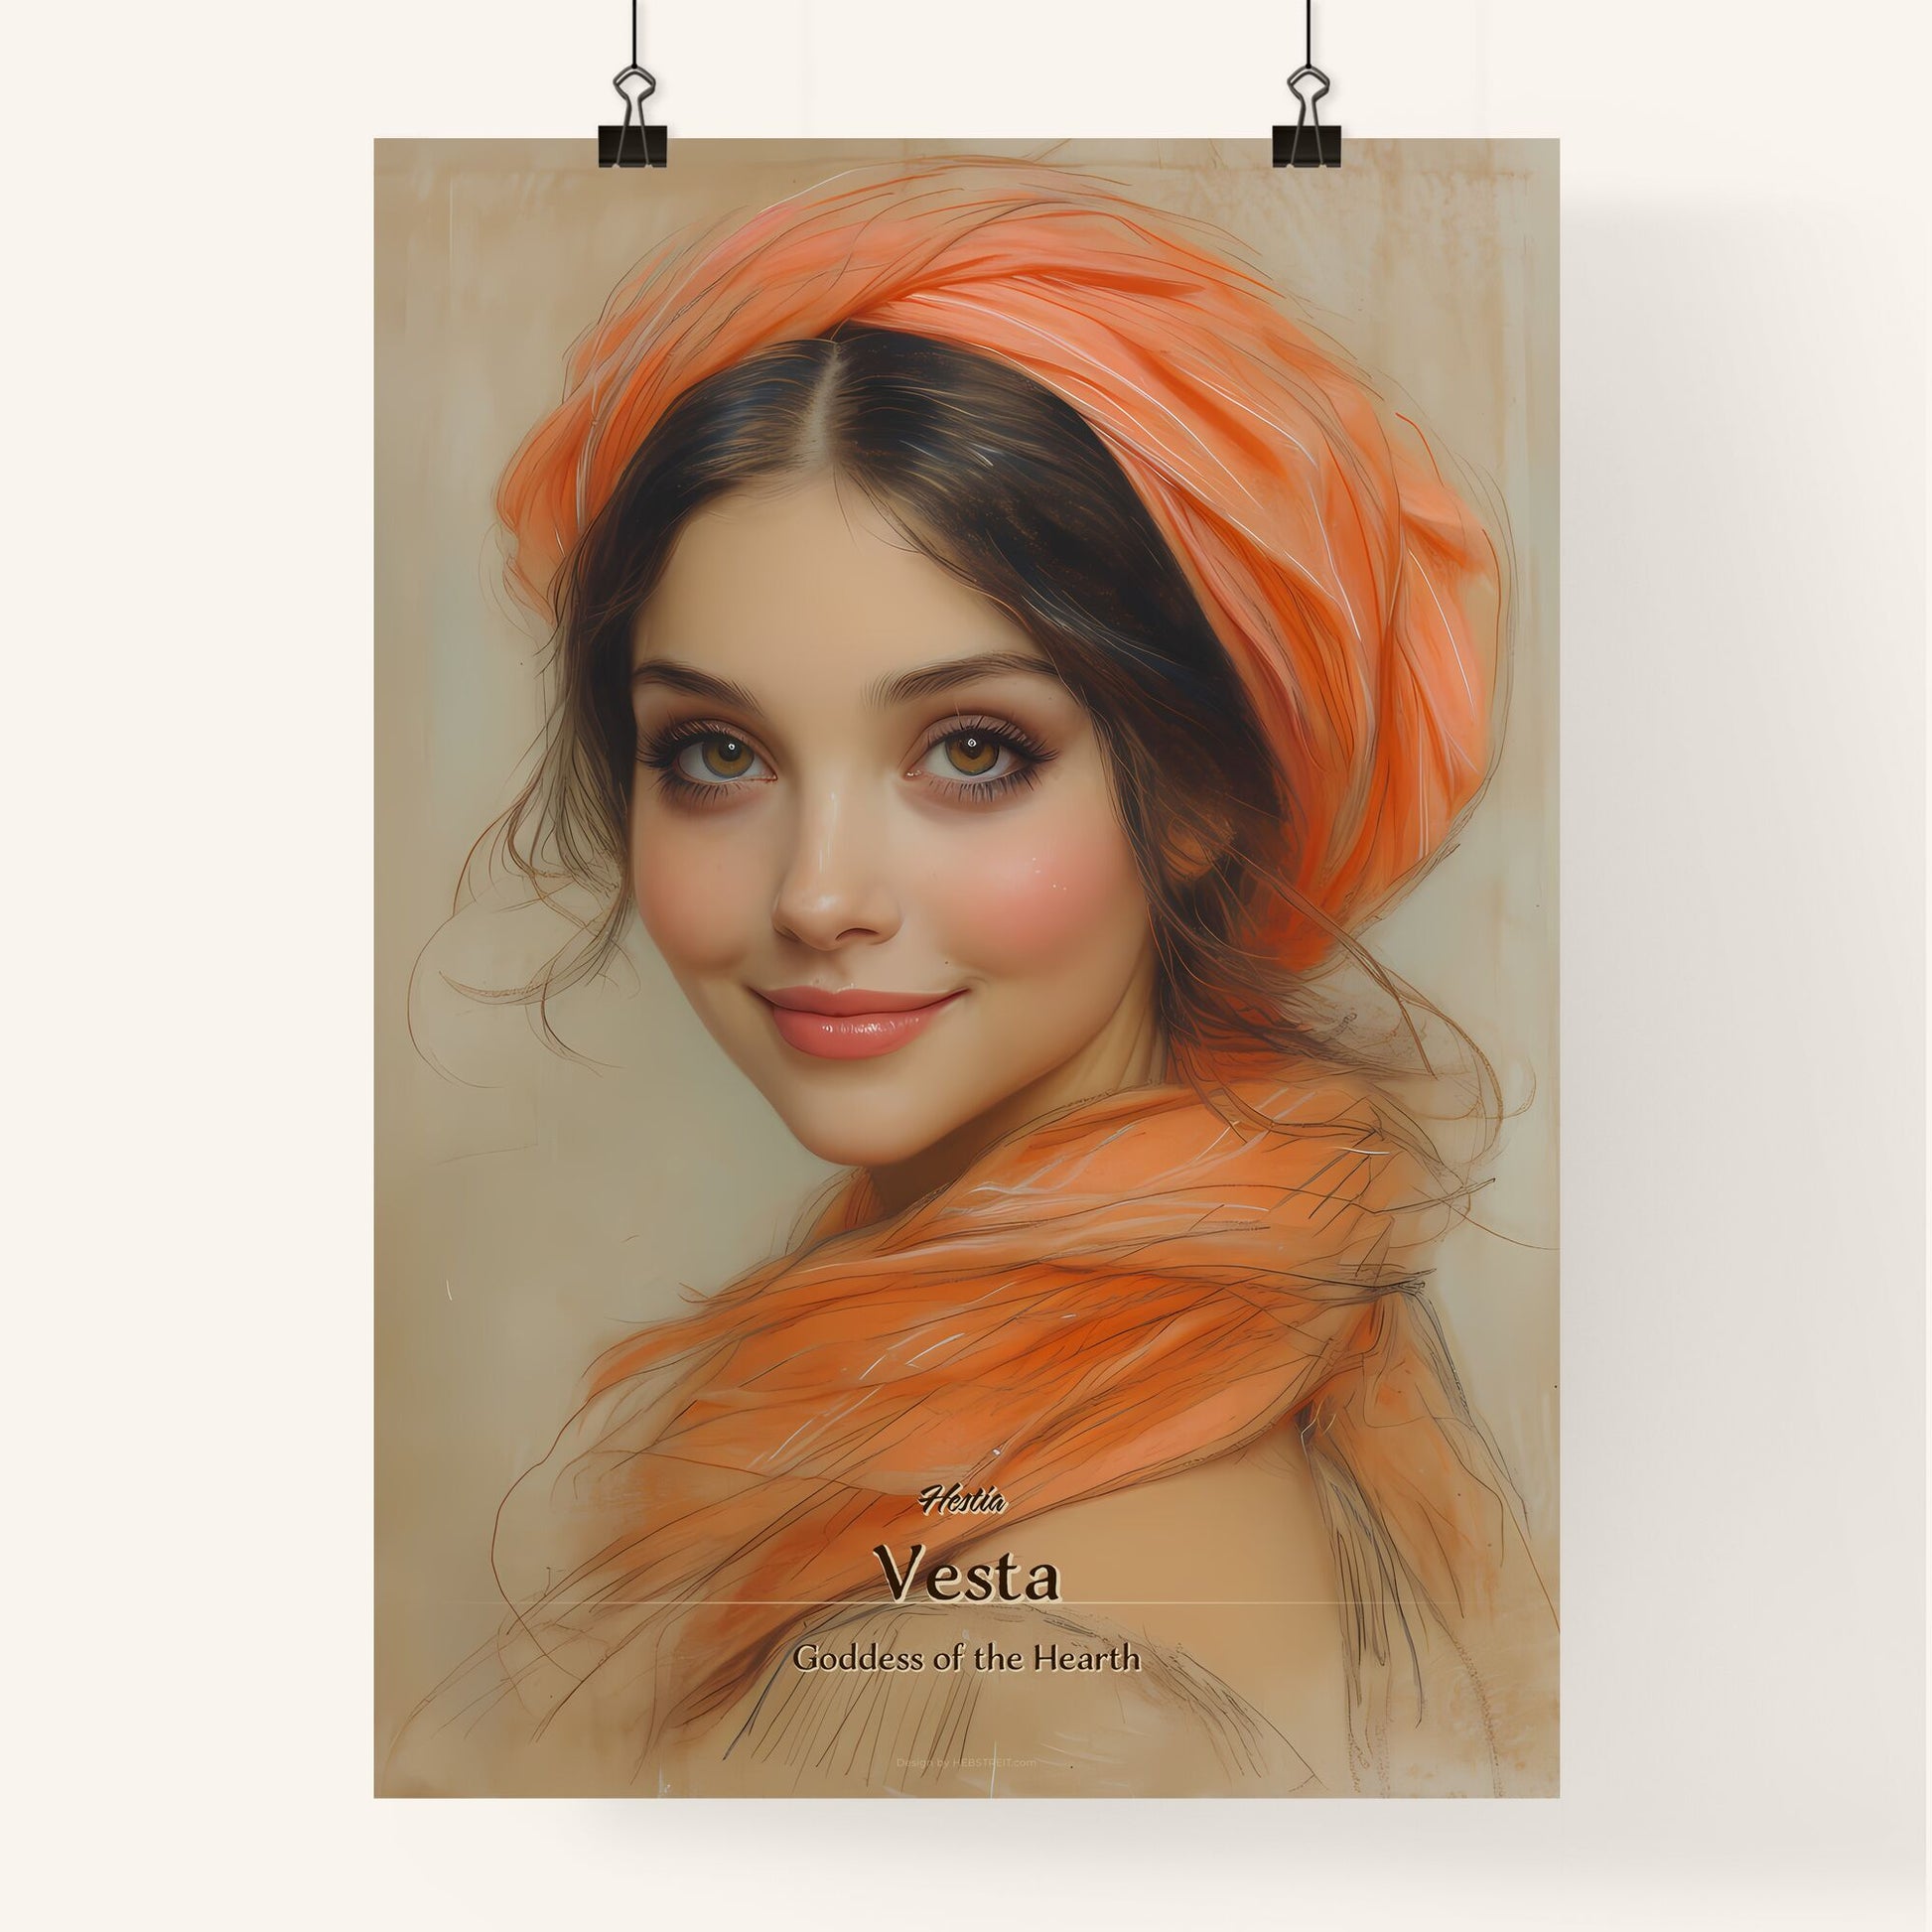 Hestia, Vesta, Goddess of the Hearth, A Poster of a woman with a scarf around her head Default Title